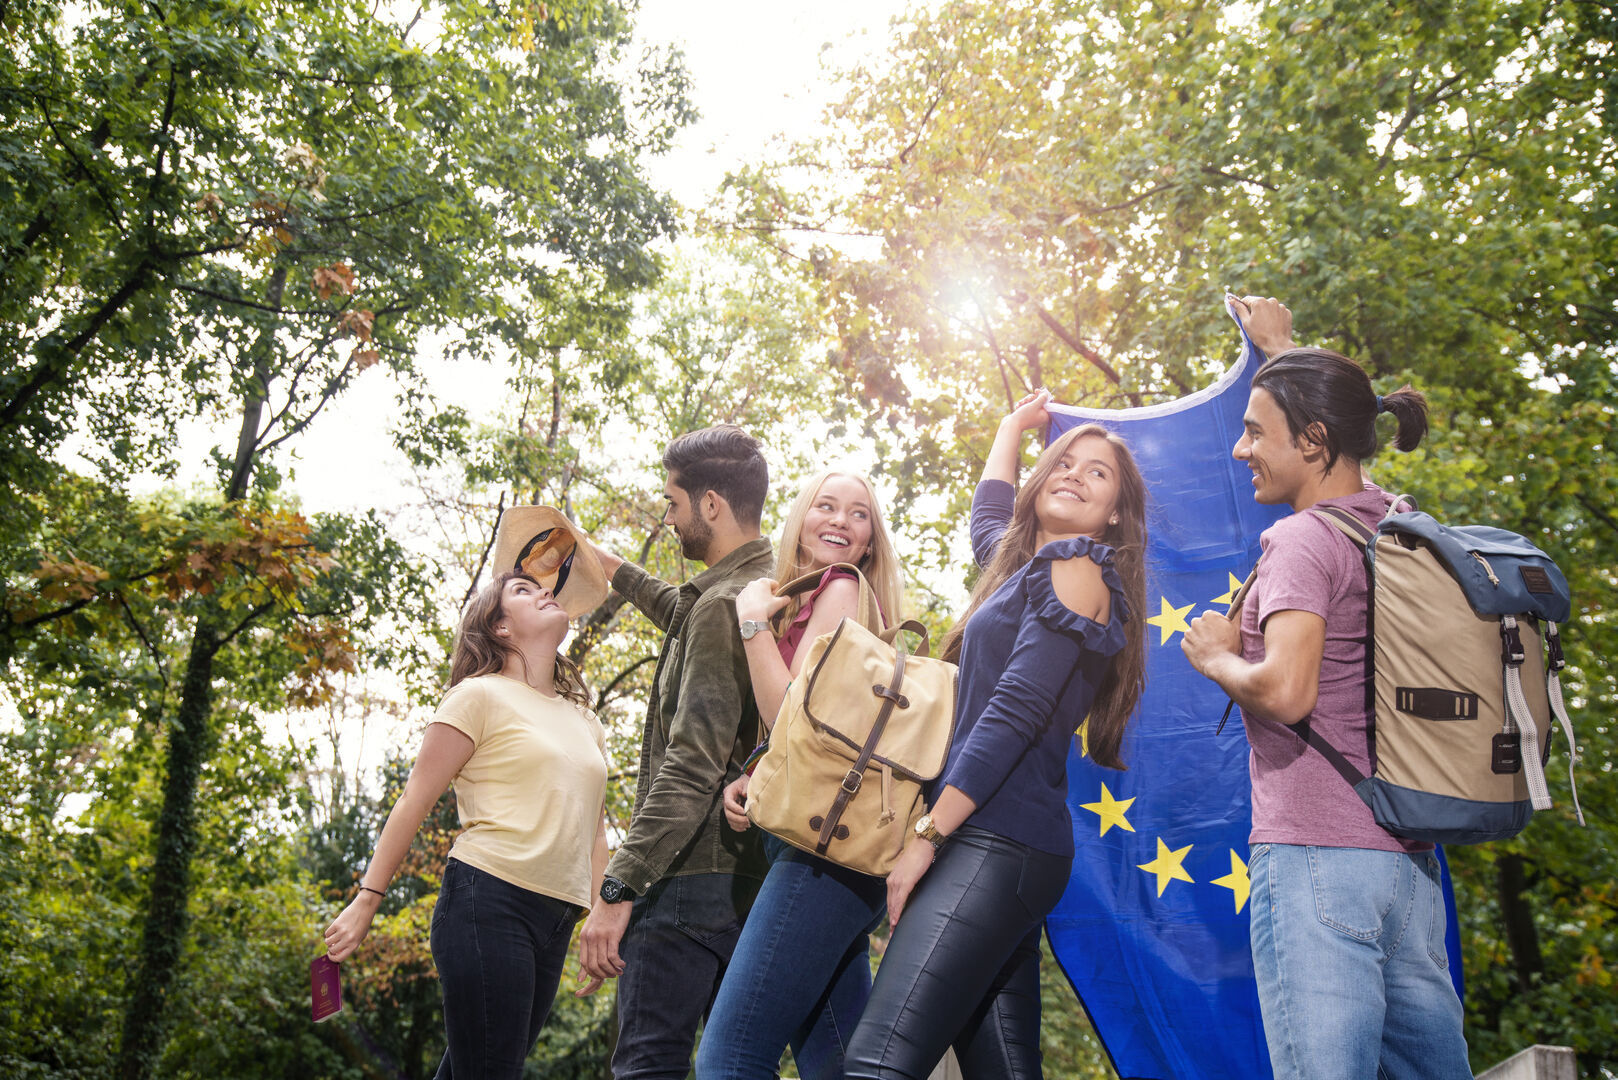 Students with backpacks, waving and holding the EU flag